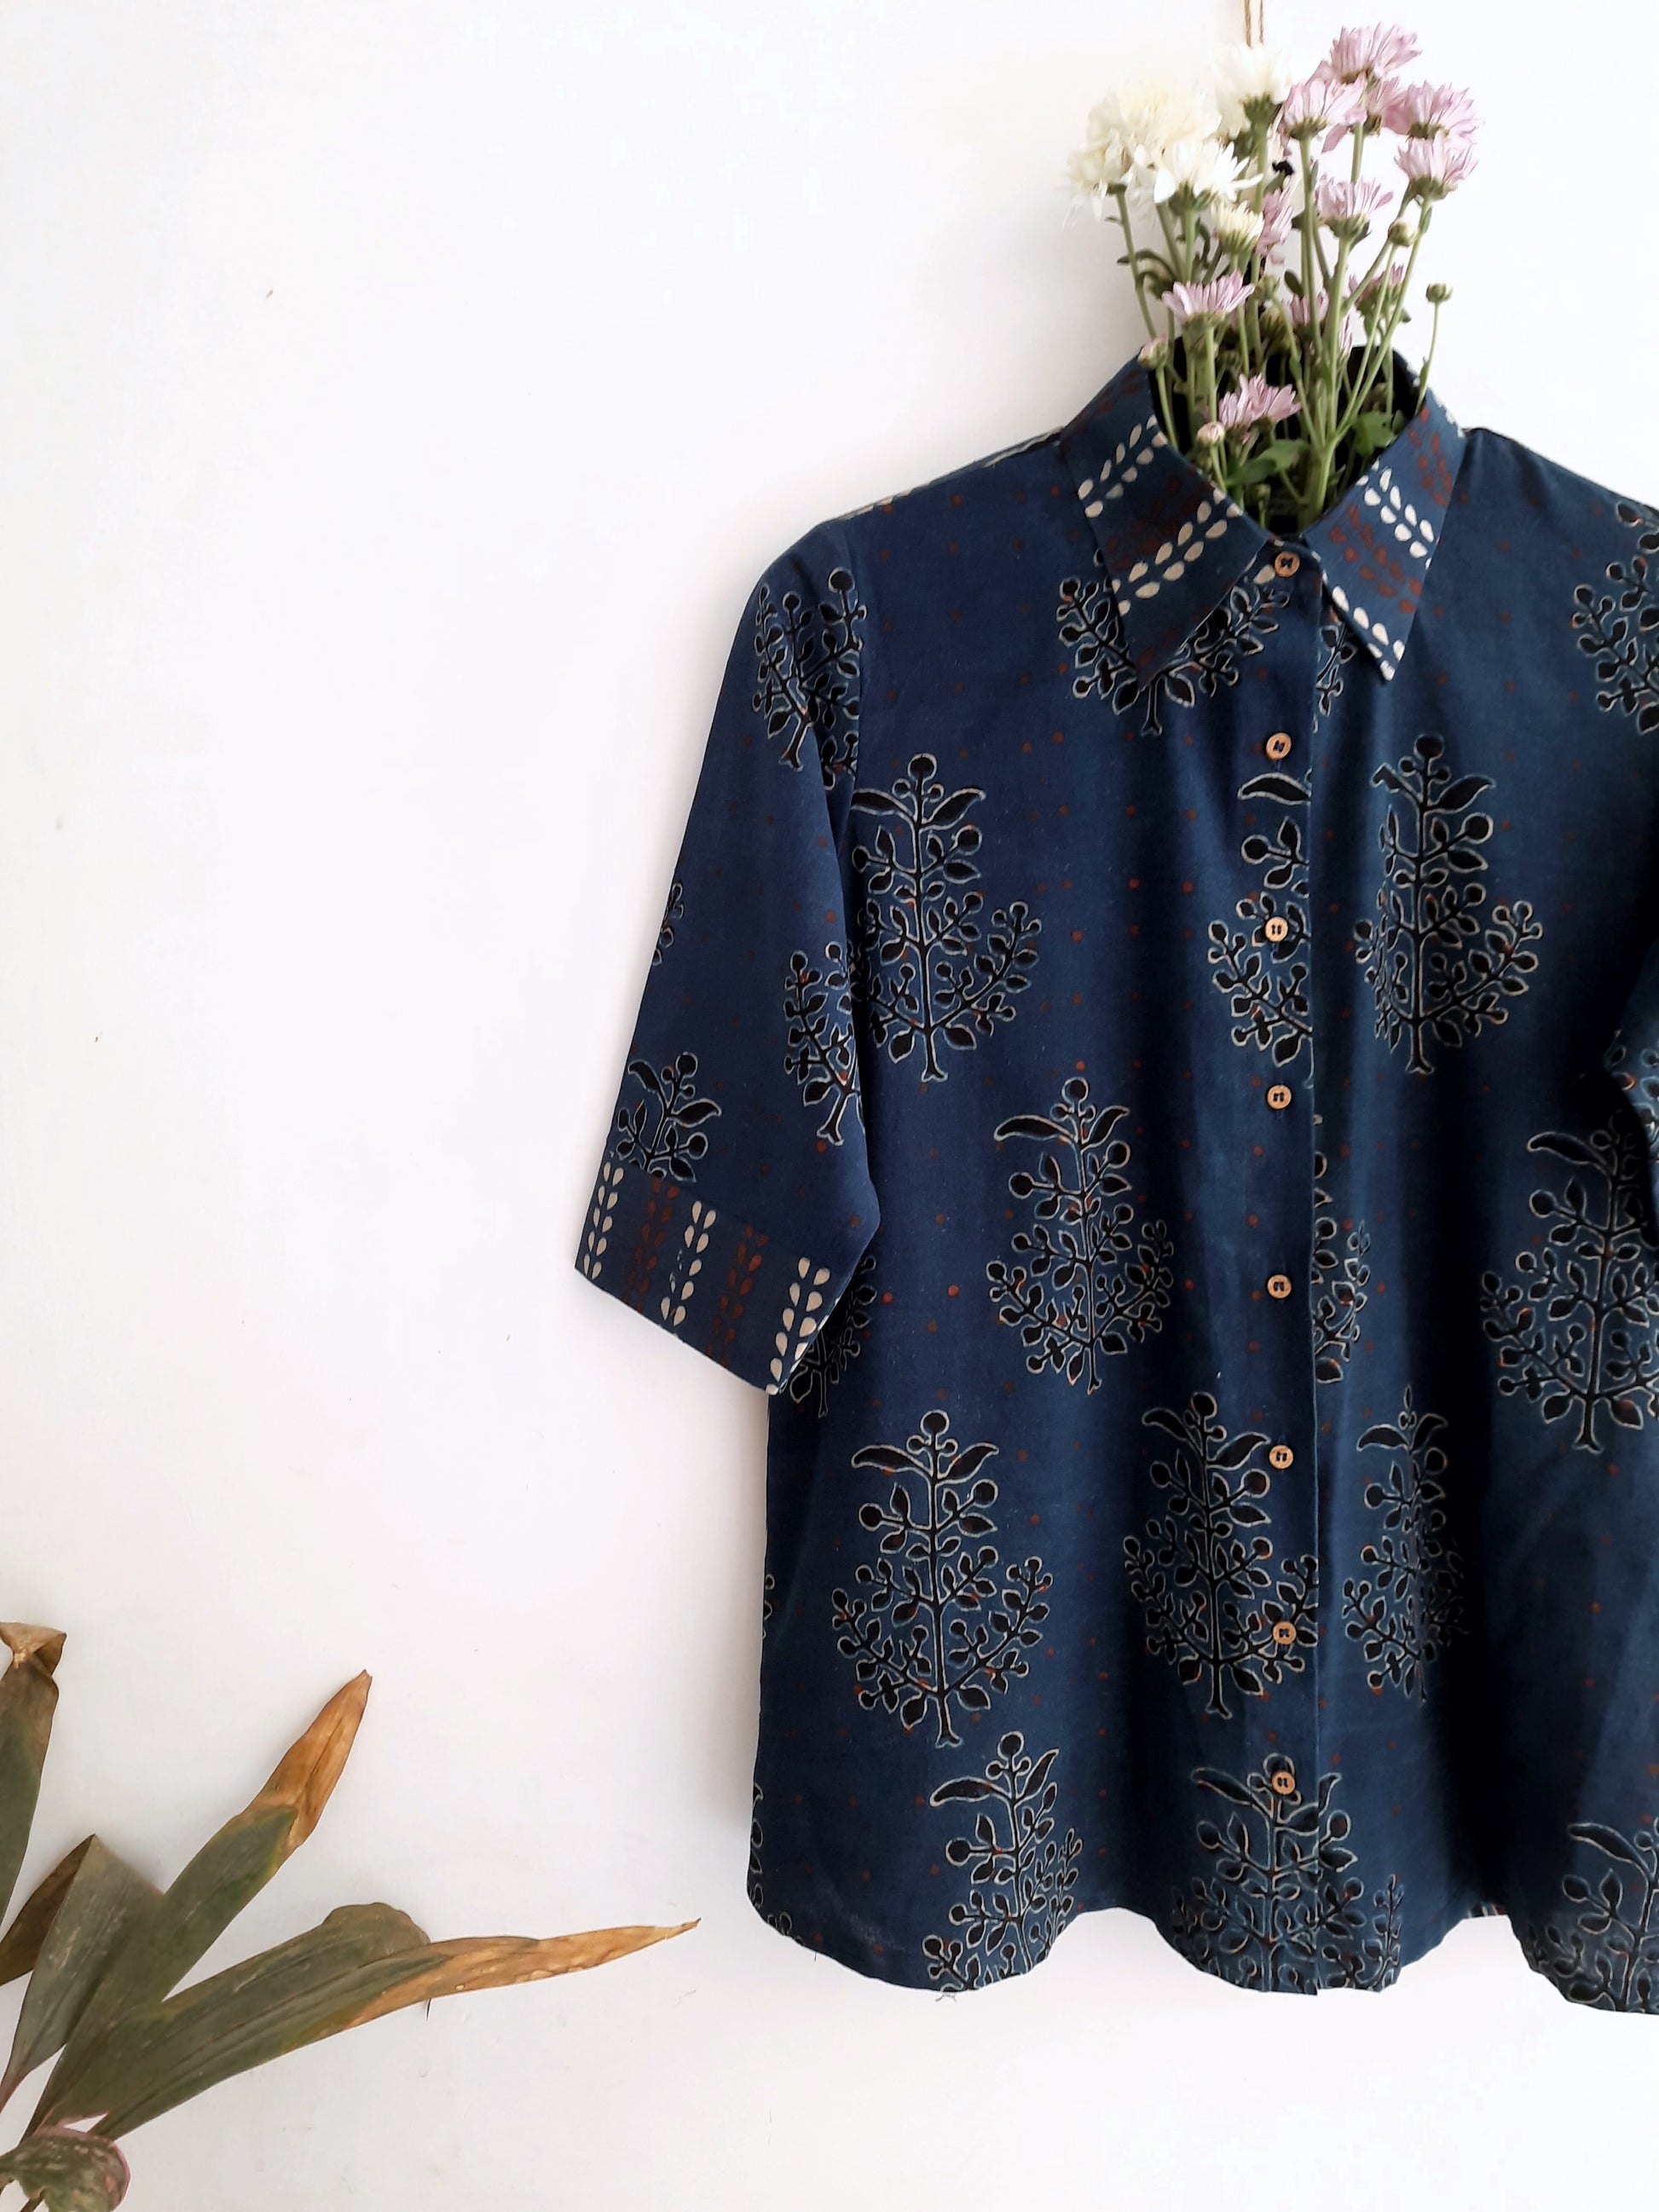 Image: Breezy Indigo Ajrakh Fusion shirt for women, featuring hand block prints in polkas, bootas, and stripes. Crafted with care, this indigo dyed shirt adds artisanal charm to any wardrobe. Shop now at Turquoisethestore.